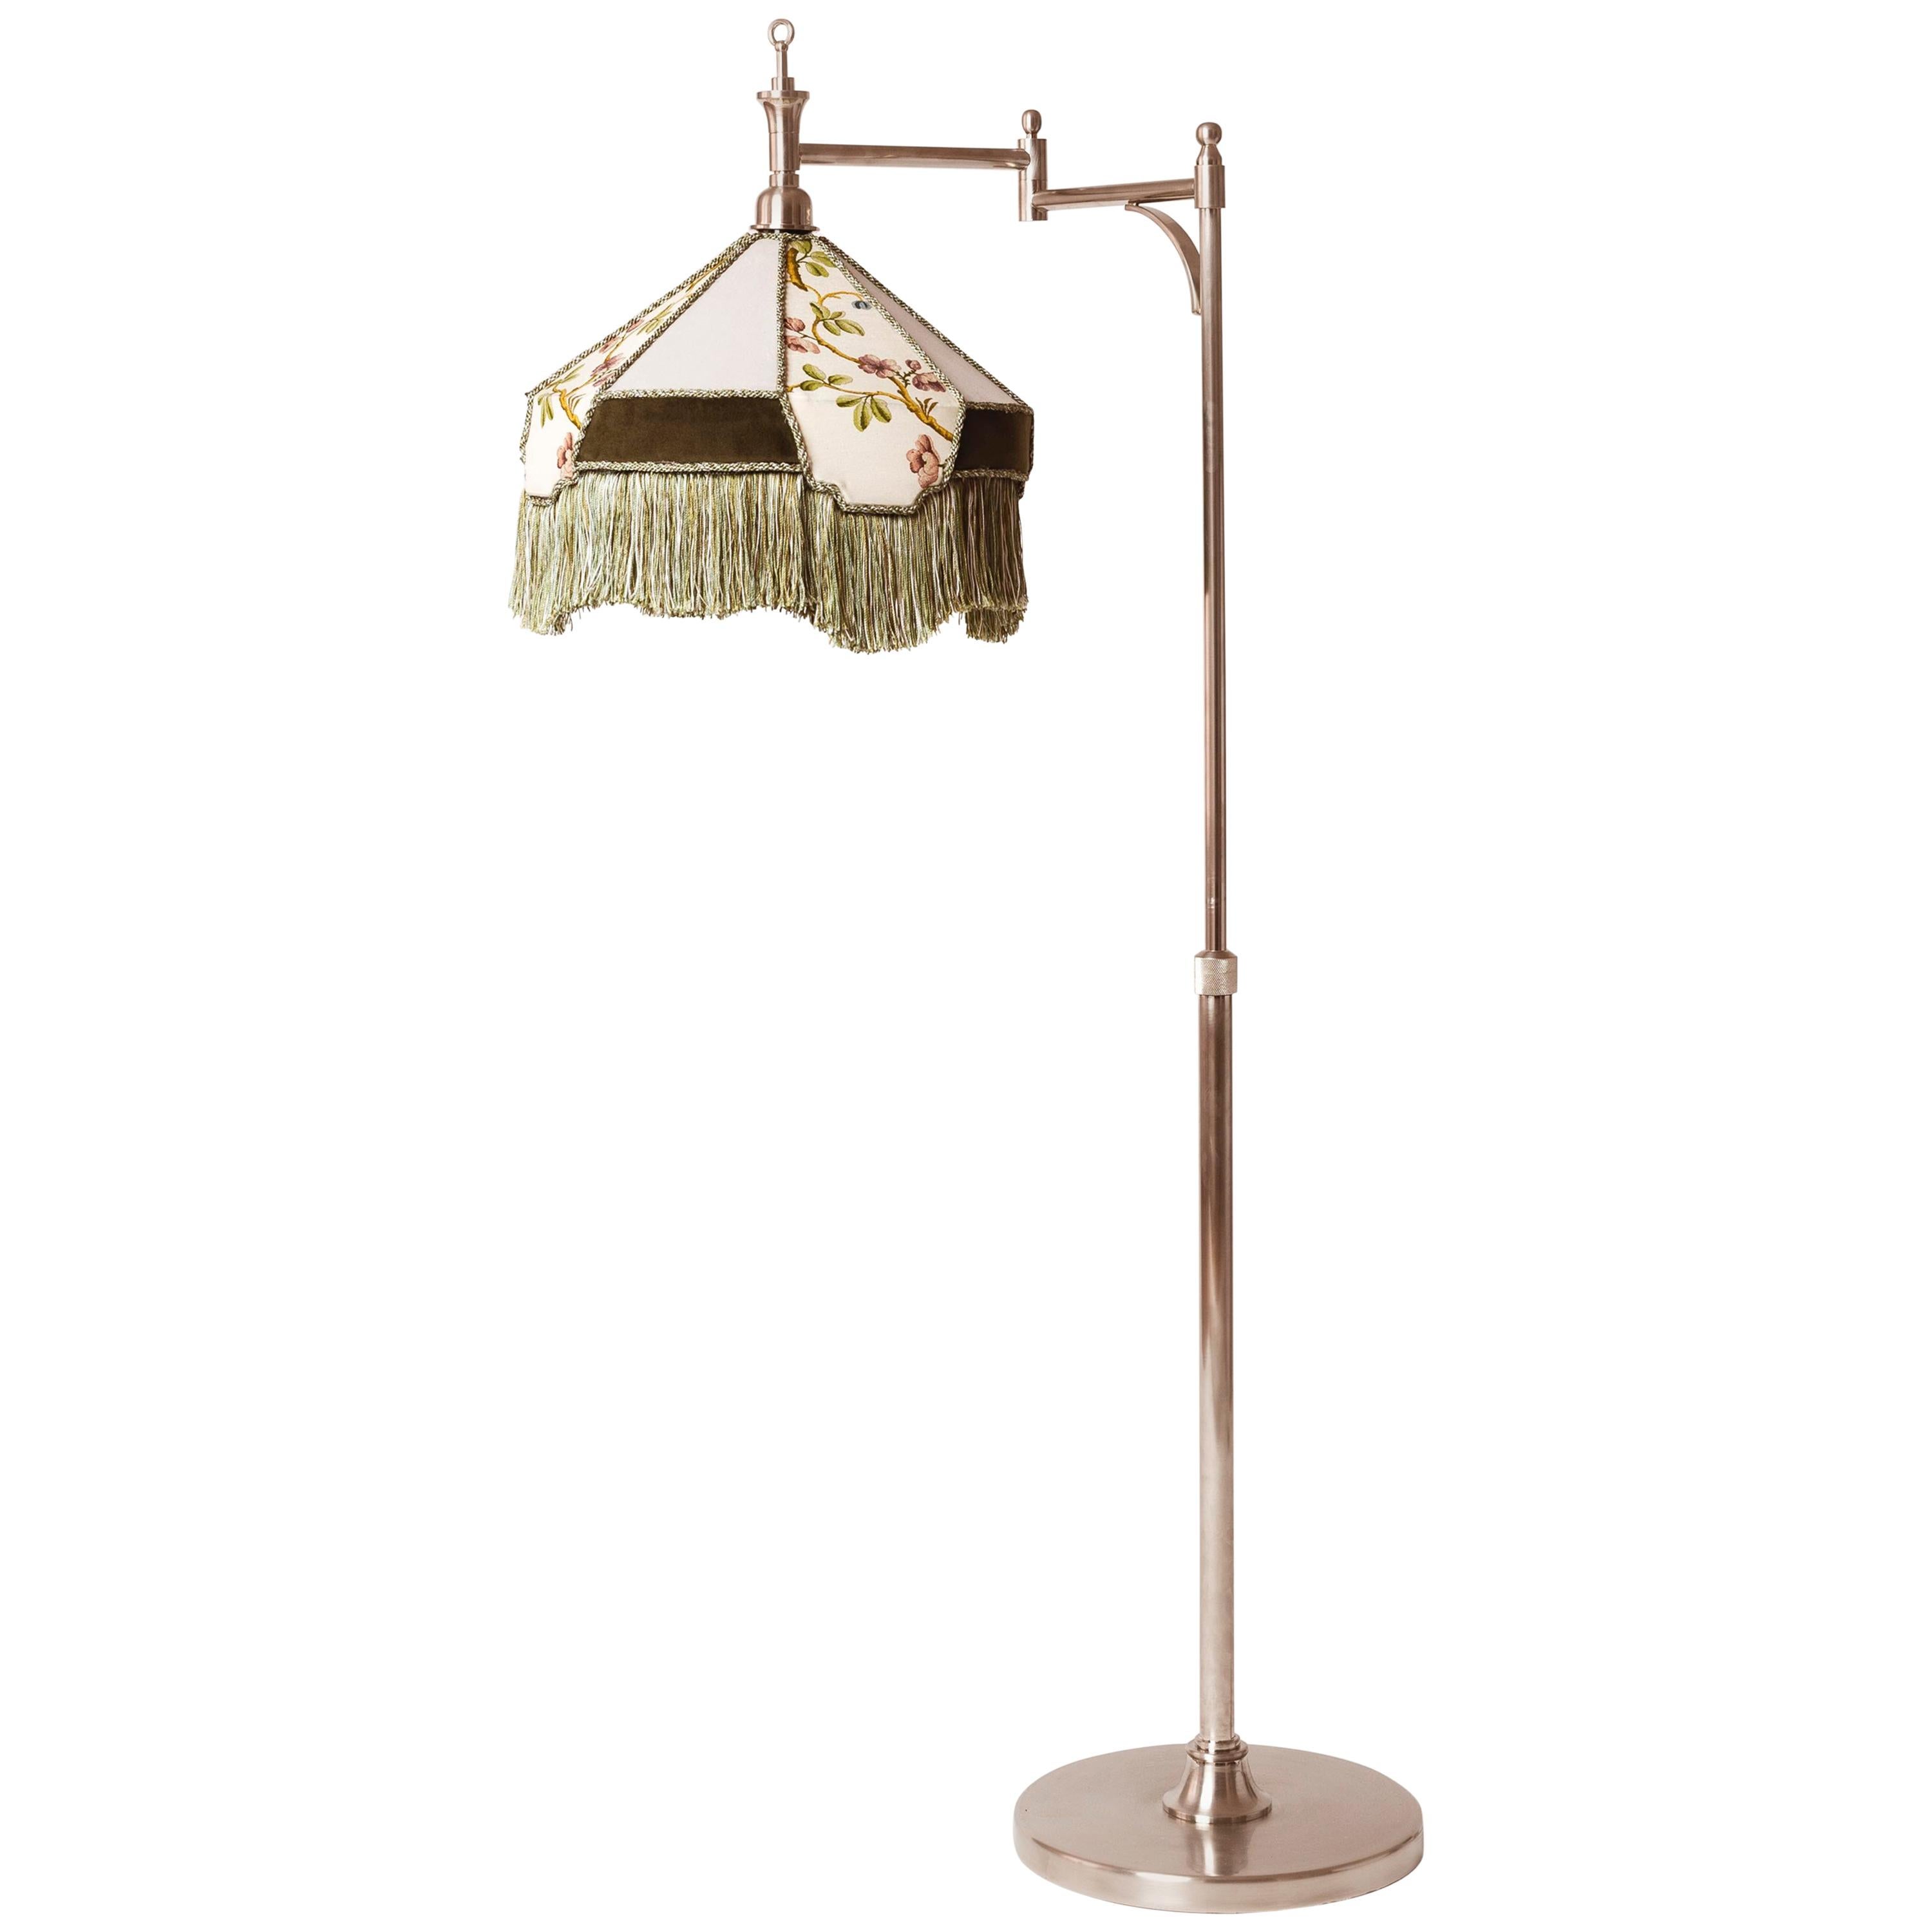 Art Deco Lamp in Brass, Finish in Polished Nickel, Lamp Shade with Embroidery 1 For Sale